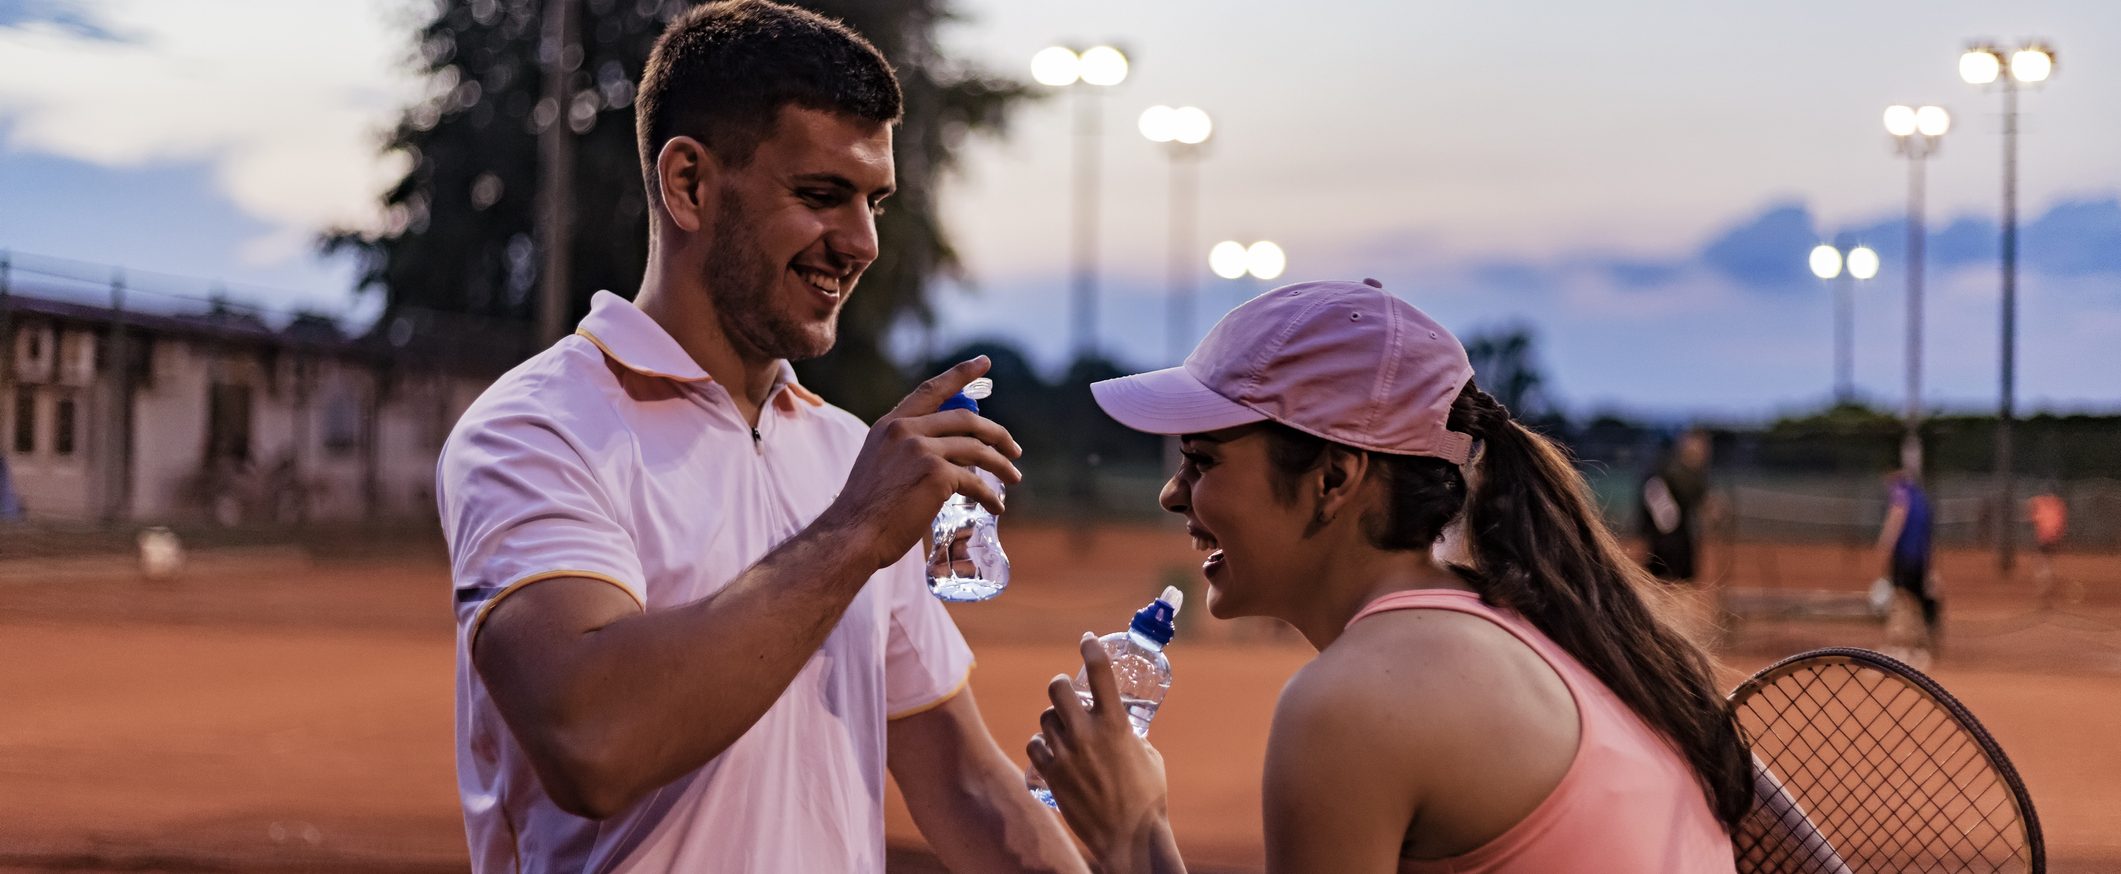 A couple takes a break from playing tennis. They smile and hold water bottles.